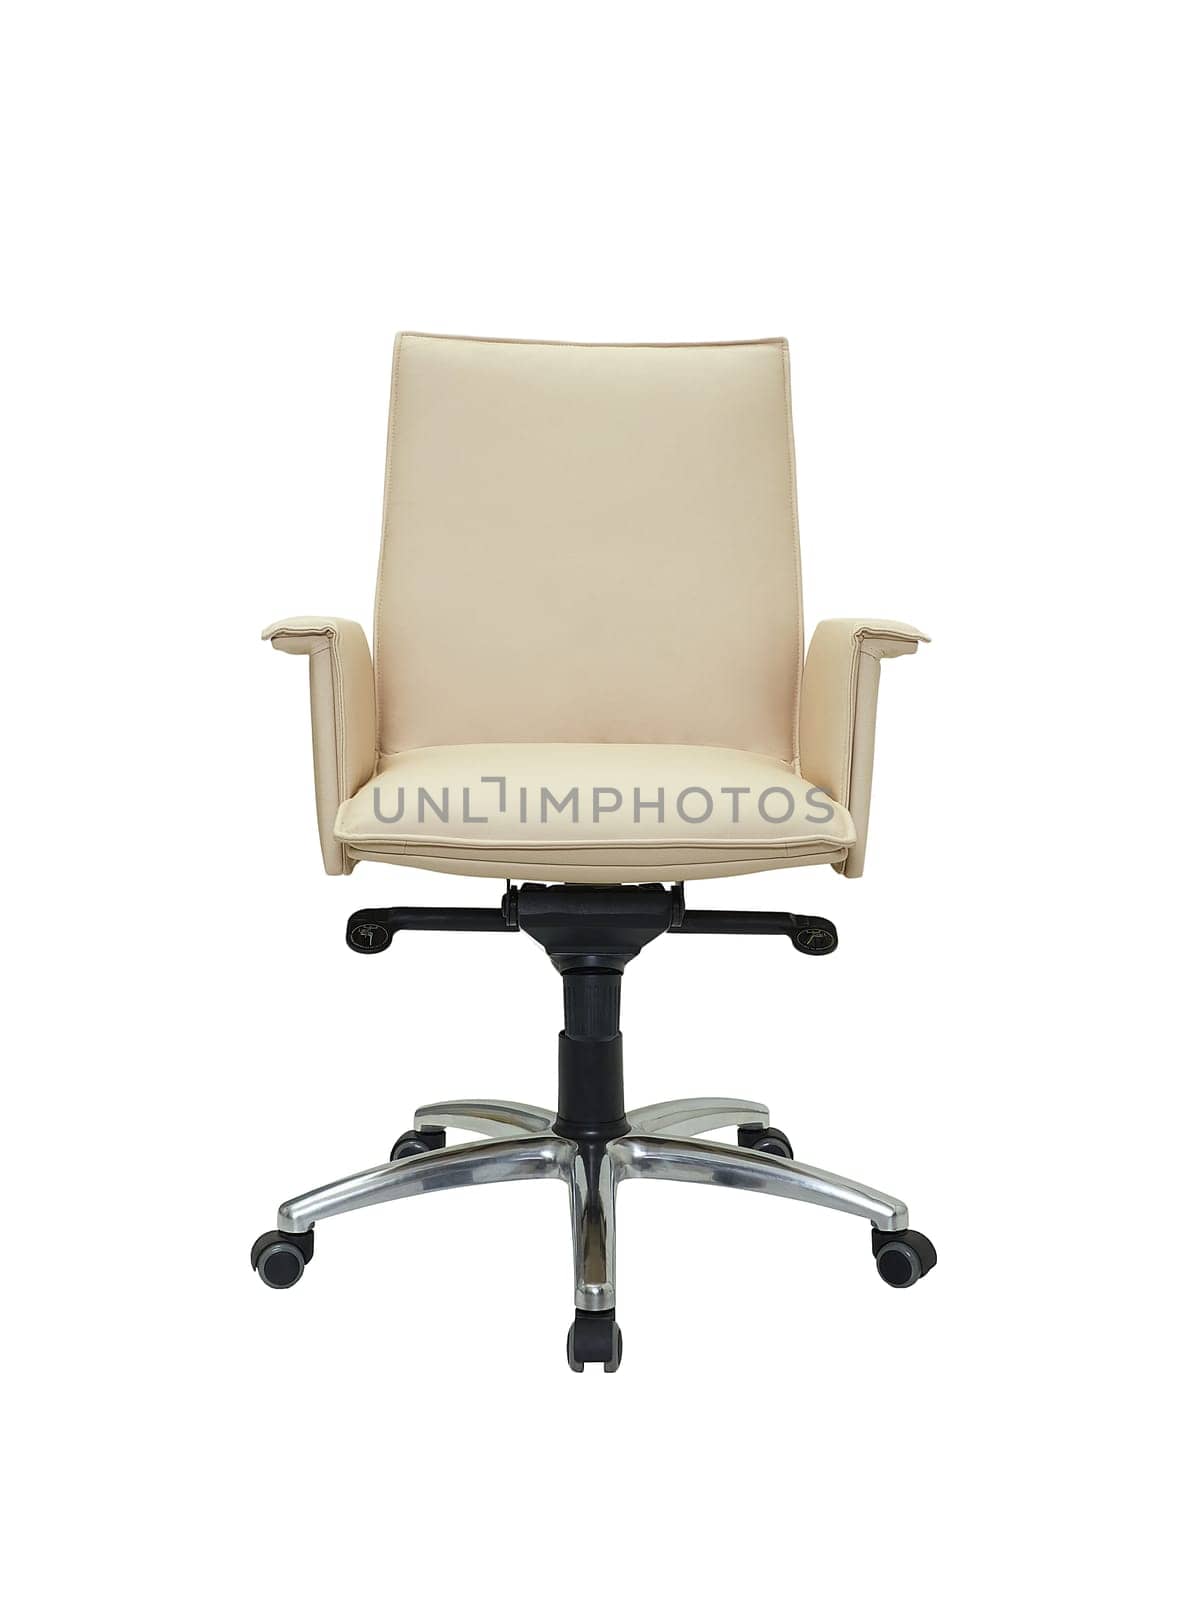 beige office armchair on wheels isolated on white background, front view by artemzatsepilin